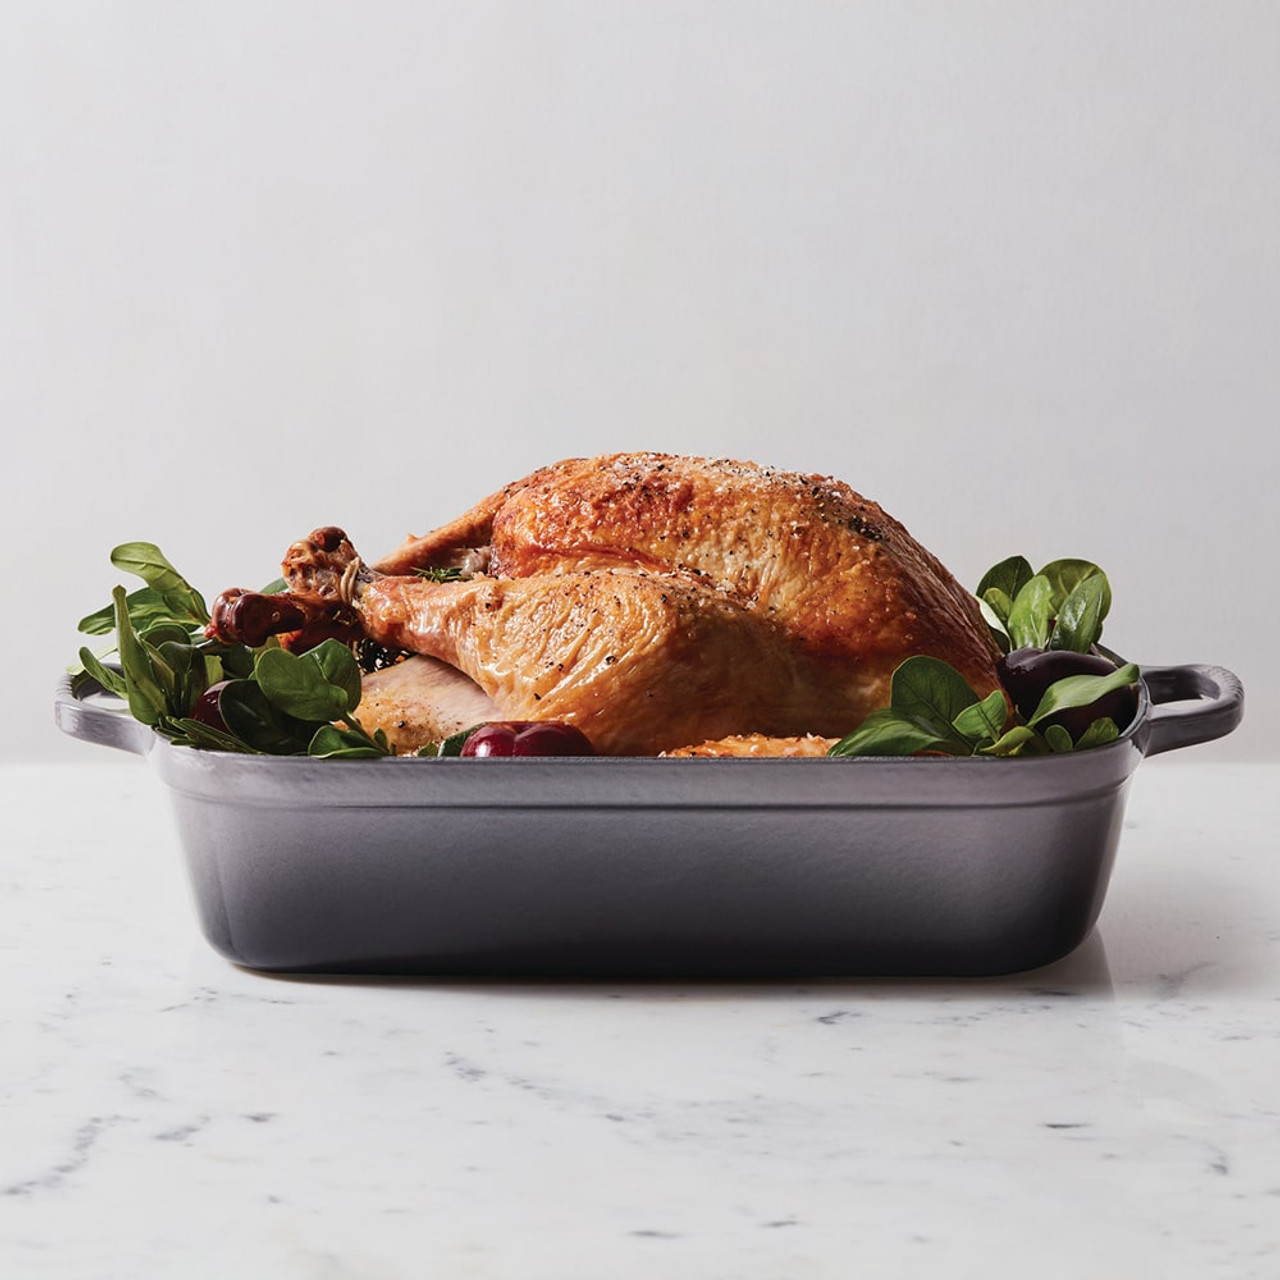 https://cdn11.bigcommerce.com/s-hccytny0od/images/stencil/1280x1280/products/1844/12806/le-creuset-signature-roaster-oyster__18486.1601413347.jpg?c=2?imbypass=on